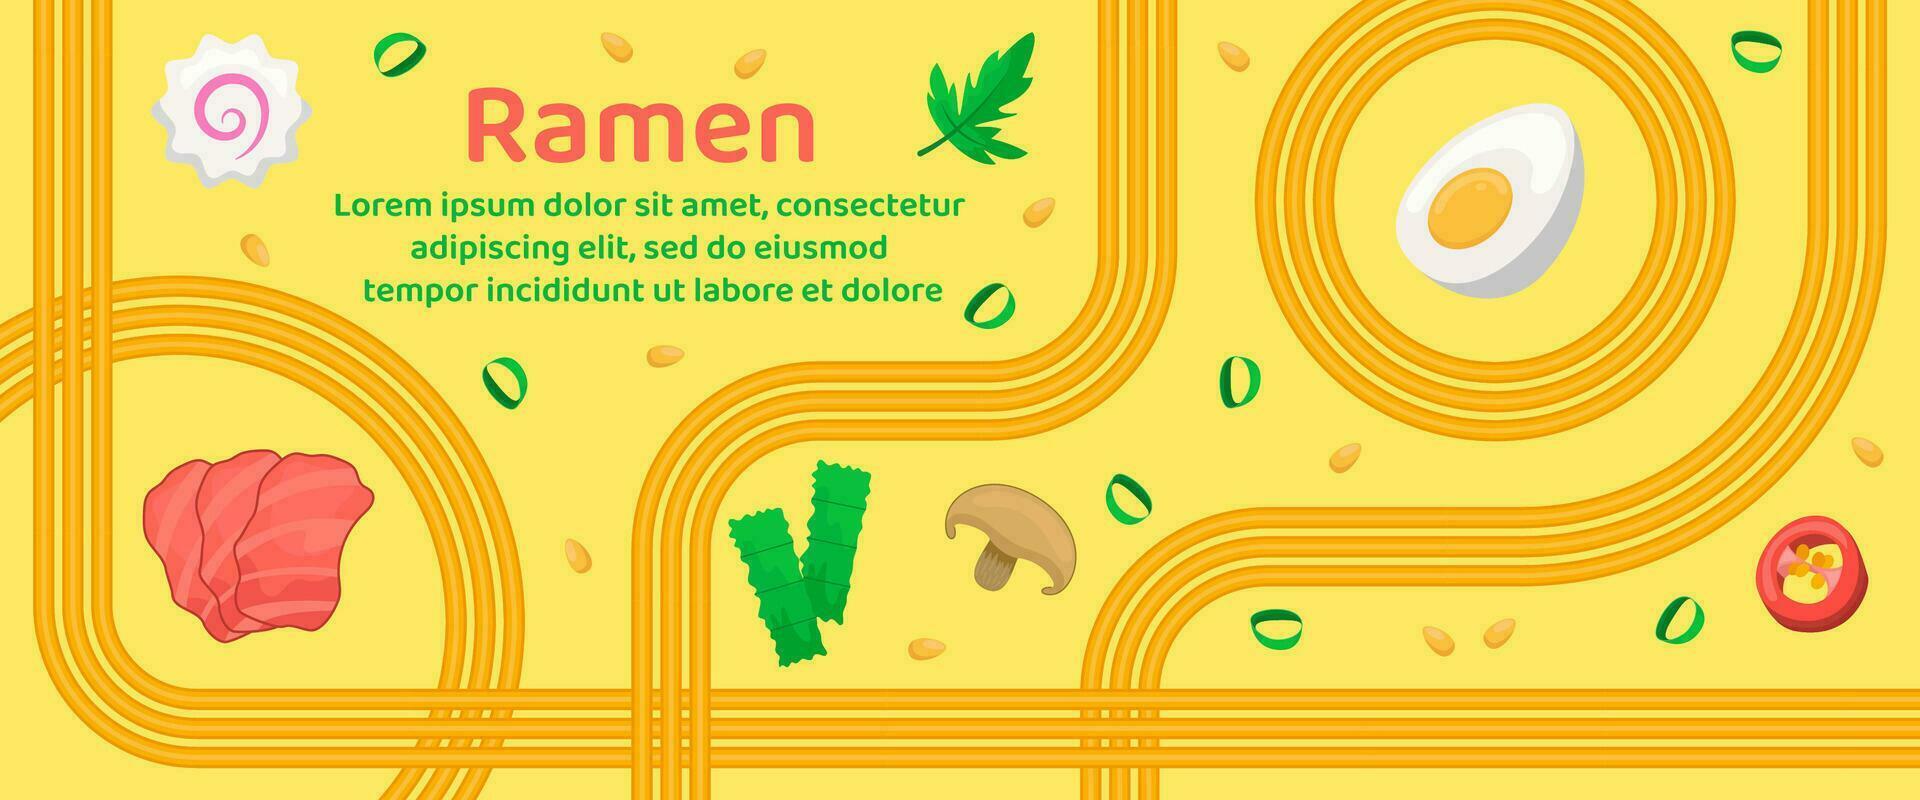 Ramen soup with meat, egg, mushrooms, kamaboko, pepper, nori and geometric wavy lines of noodles. Asian instant noodle, pasta and spaghetti. Japanese, Chinese wavy template for banner, menu, card, ad vector